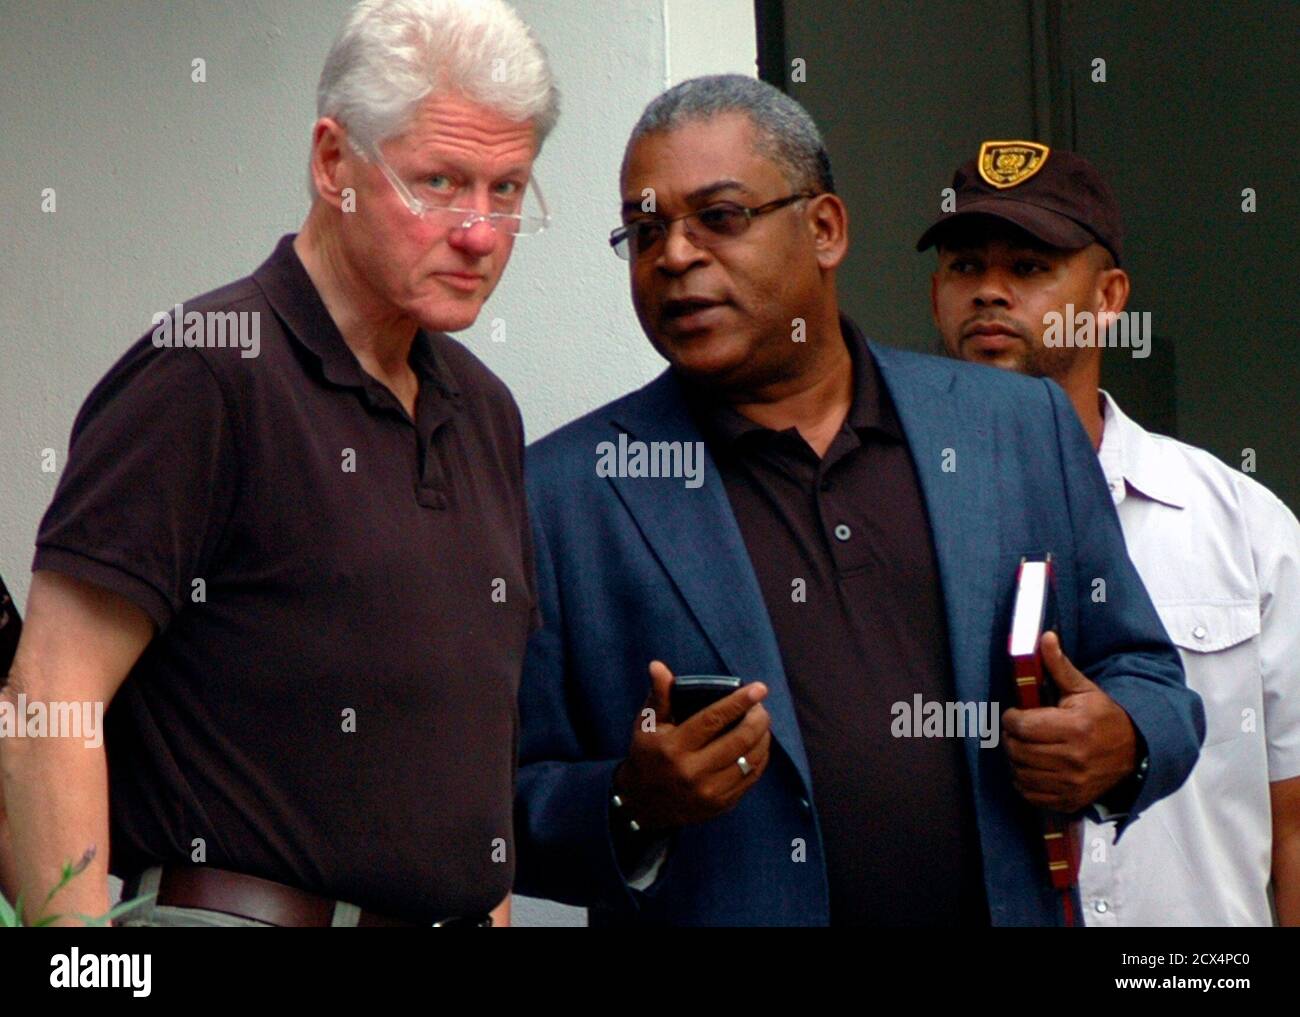 Former U.S. President Bill Clinton (L) and Haitian Prime Minister Jean-Max  Bellerive (C) speak before attending a news conference to talk about  Haiti's reconstruction in Port-au-Prince December 15, 2010.  REUTERS/St-Felix Evens (HAITI -